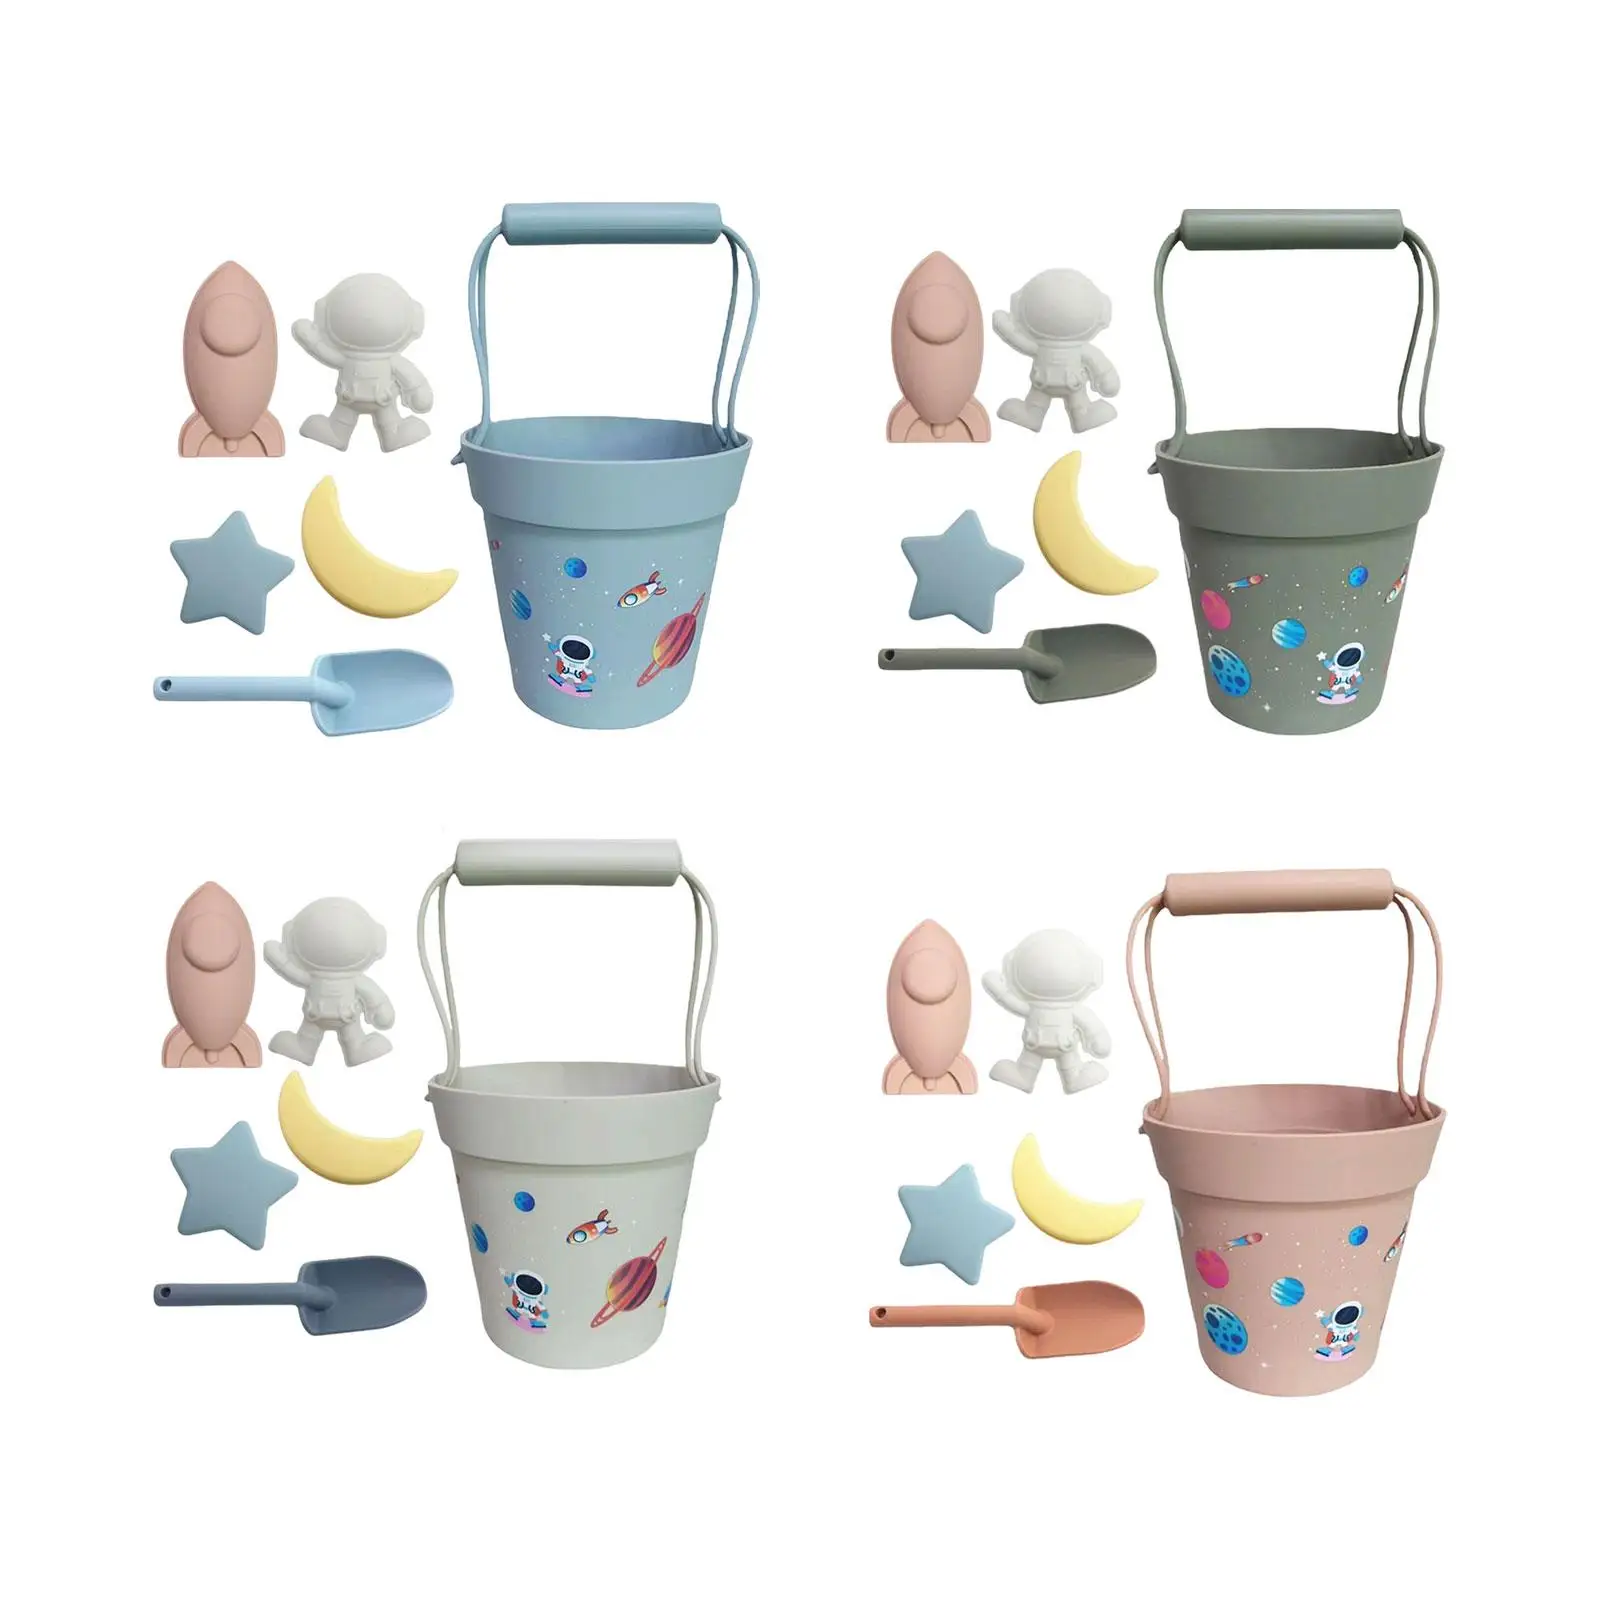 6 Pieces Beach Sand Toys Outdoor Summer Playset Play Game Sand Buckets and Shovels Set for Kids Boys Girls Baby Children